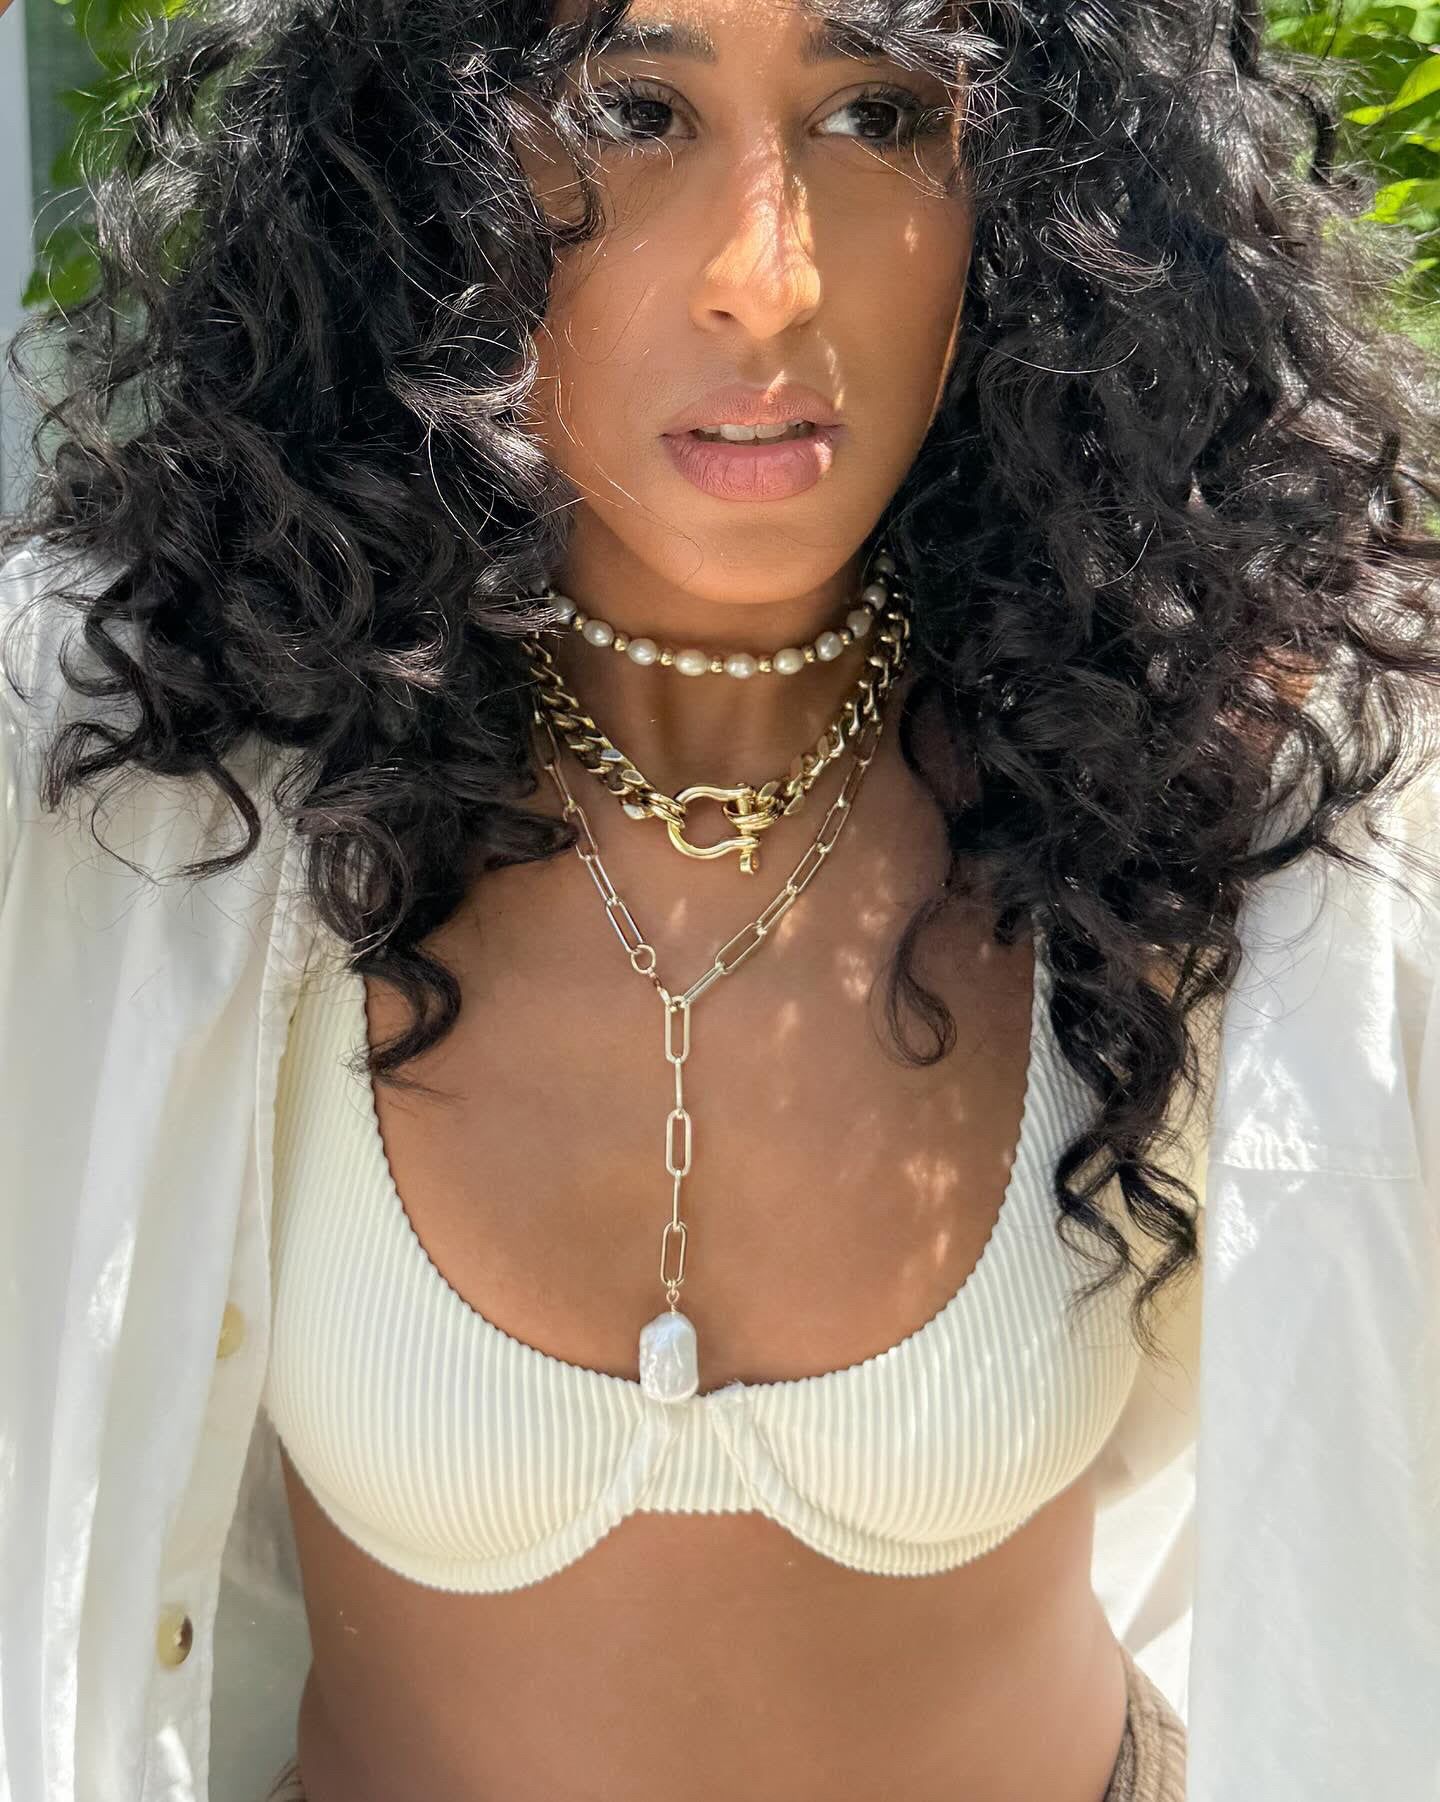 a woman wearing a white bikini top and a chain around her neck